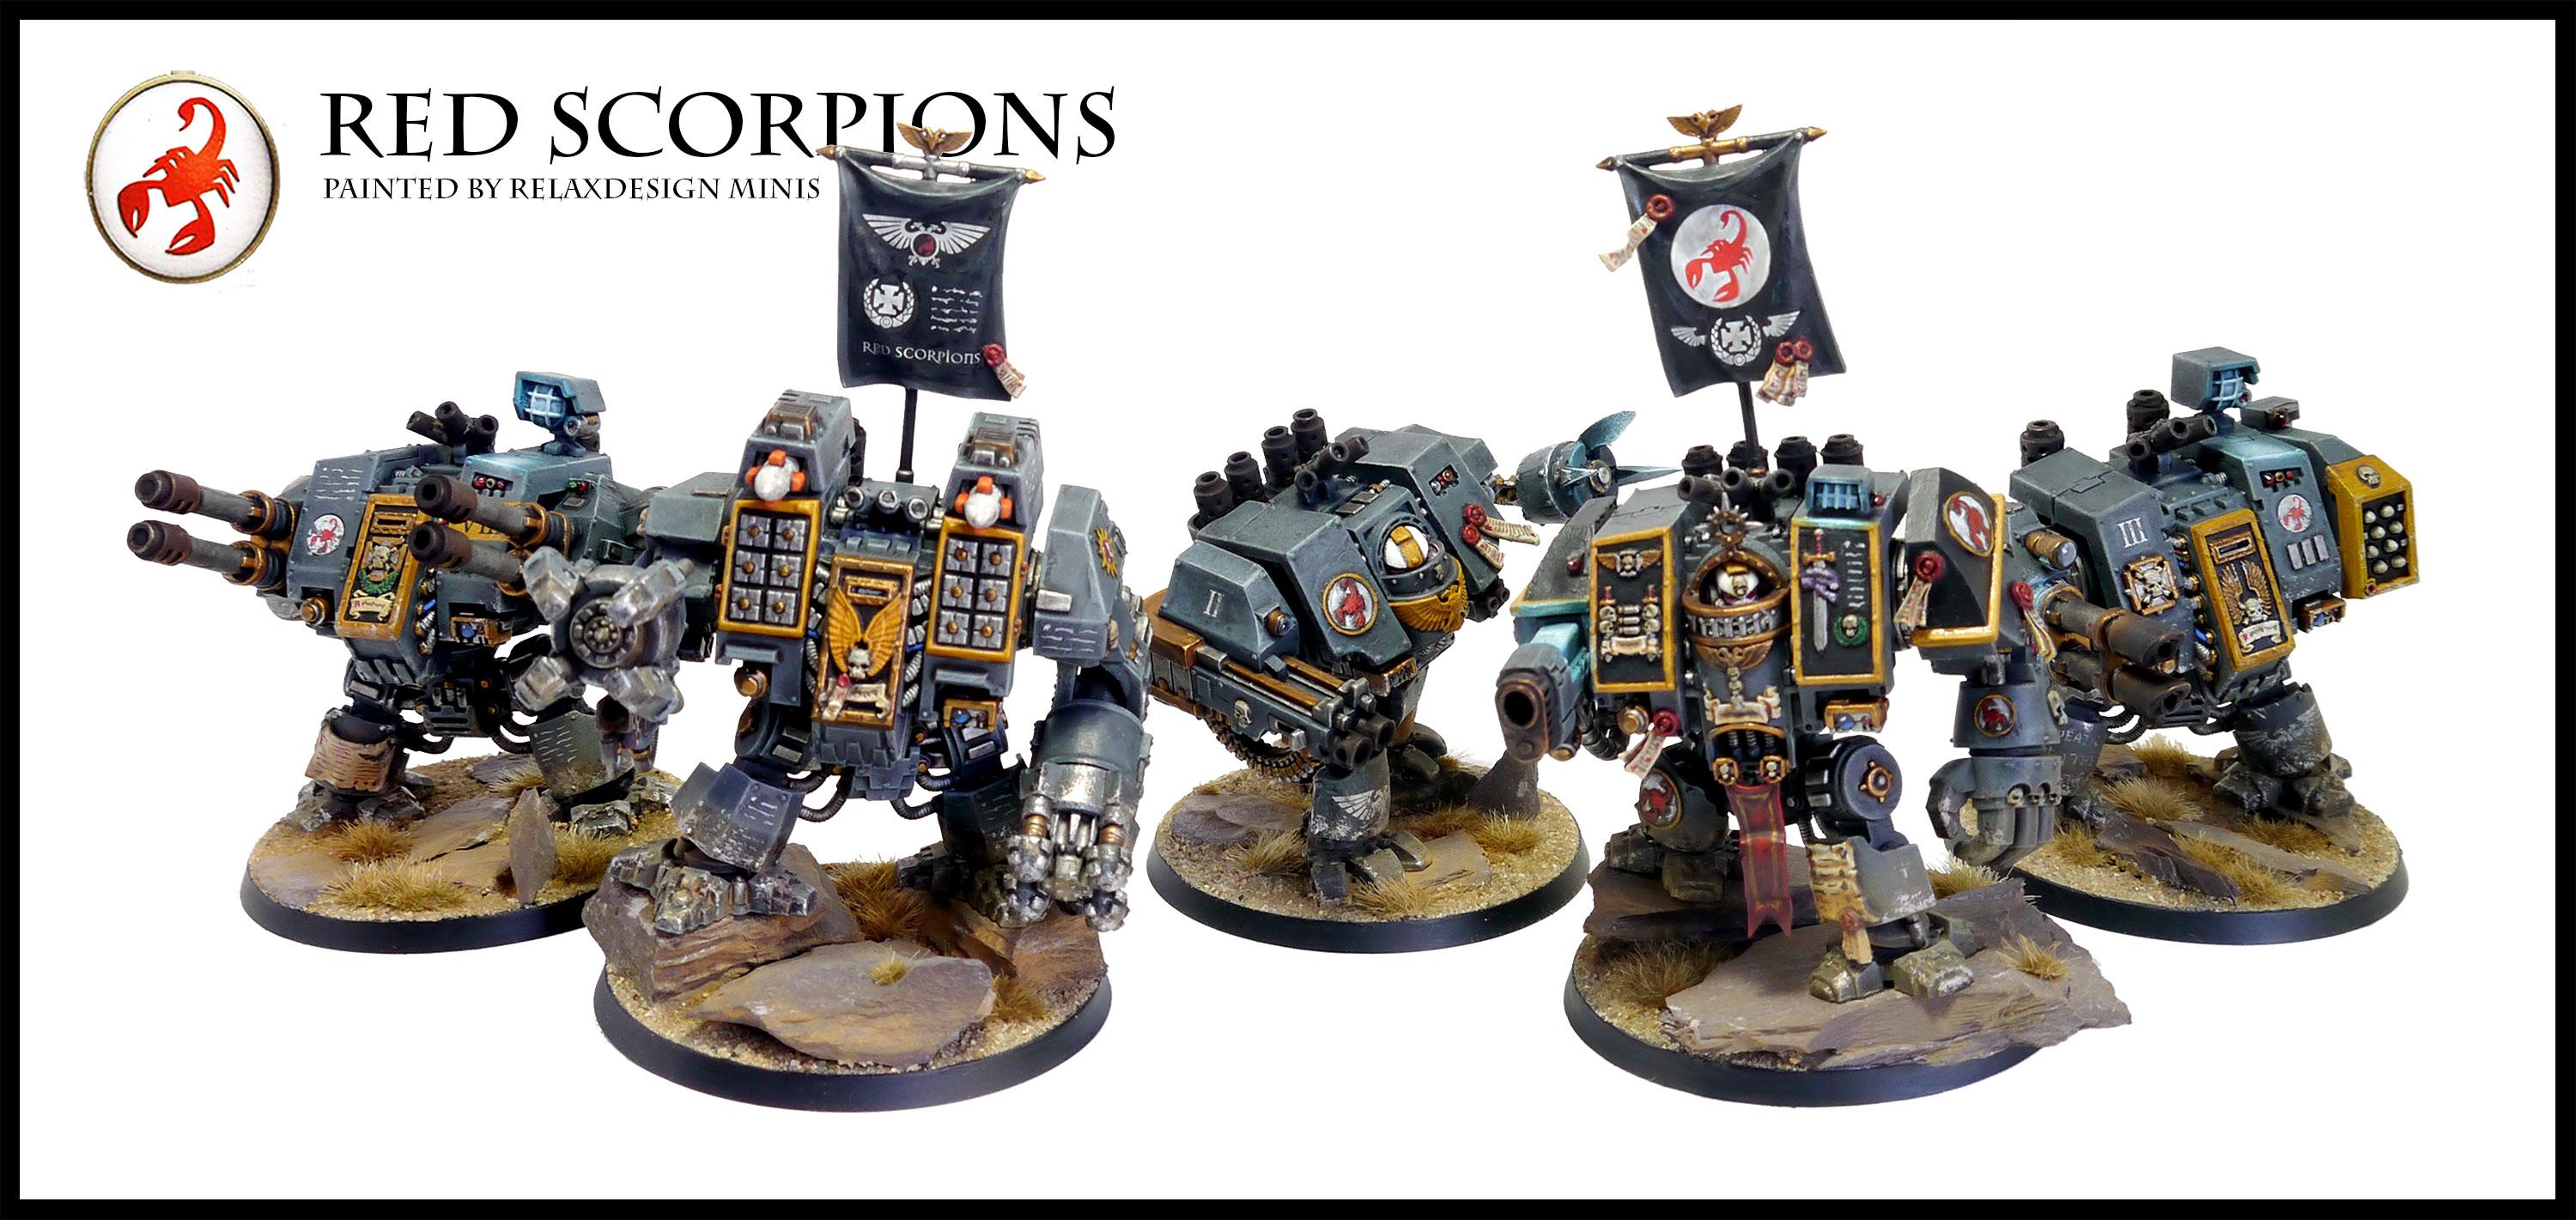 Conclave, Dreadnought, Forge World, Games Workshop, Red Scorpions, Space Marines, Warhammer 40,000, Warhammer Fantasy